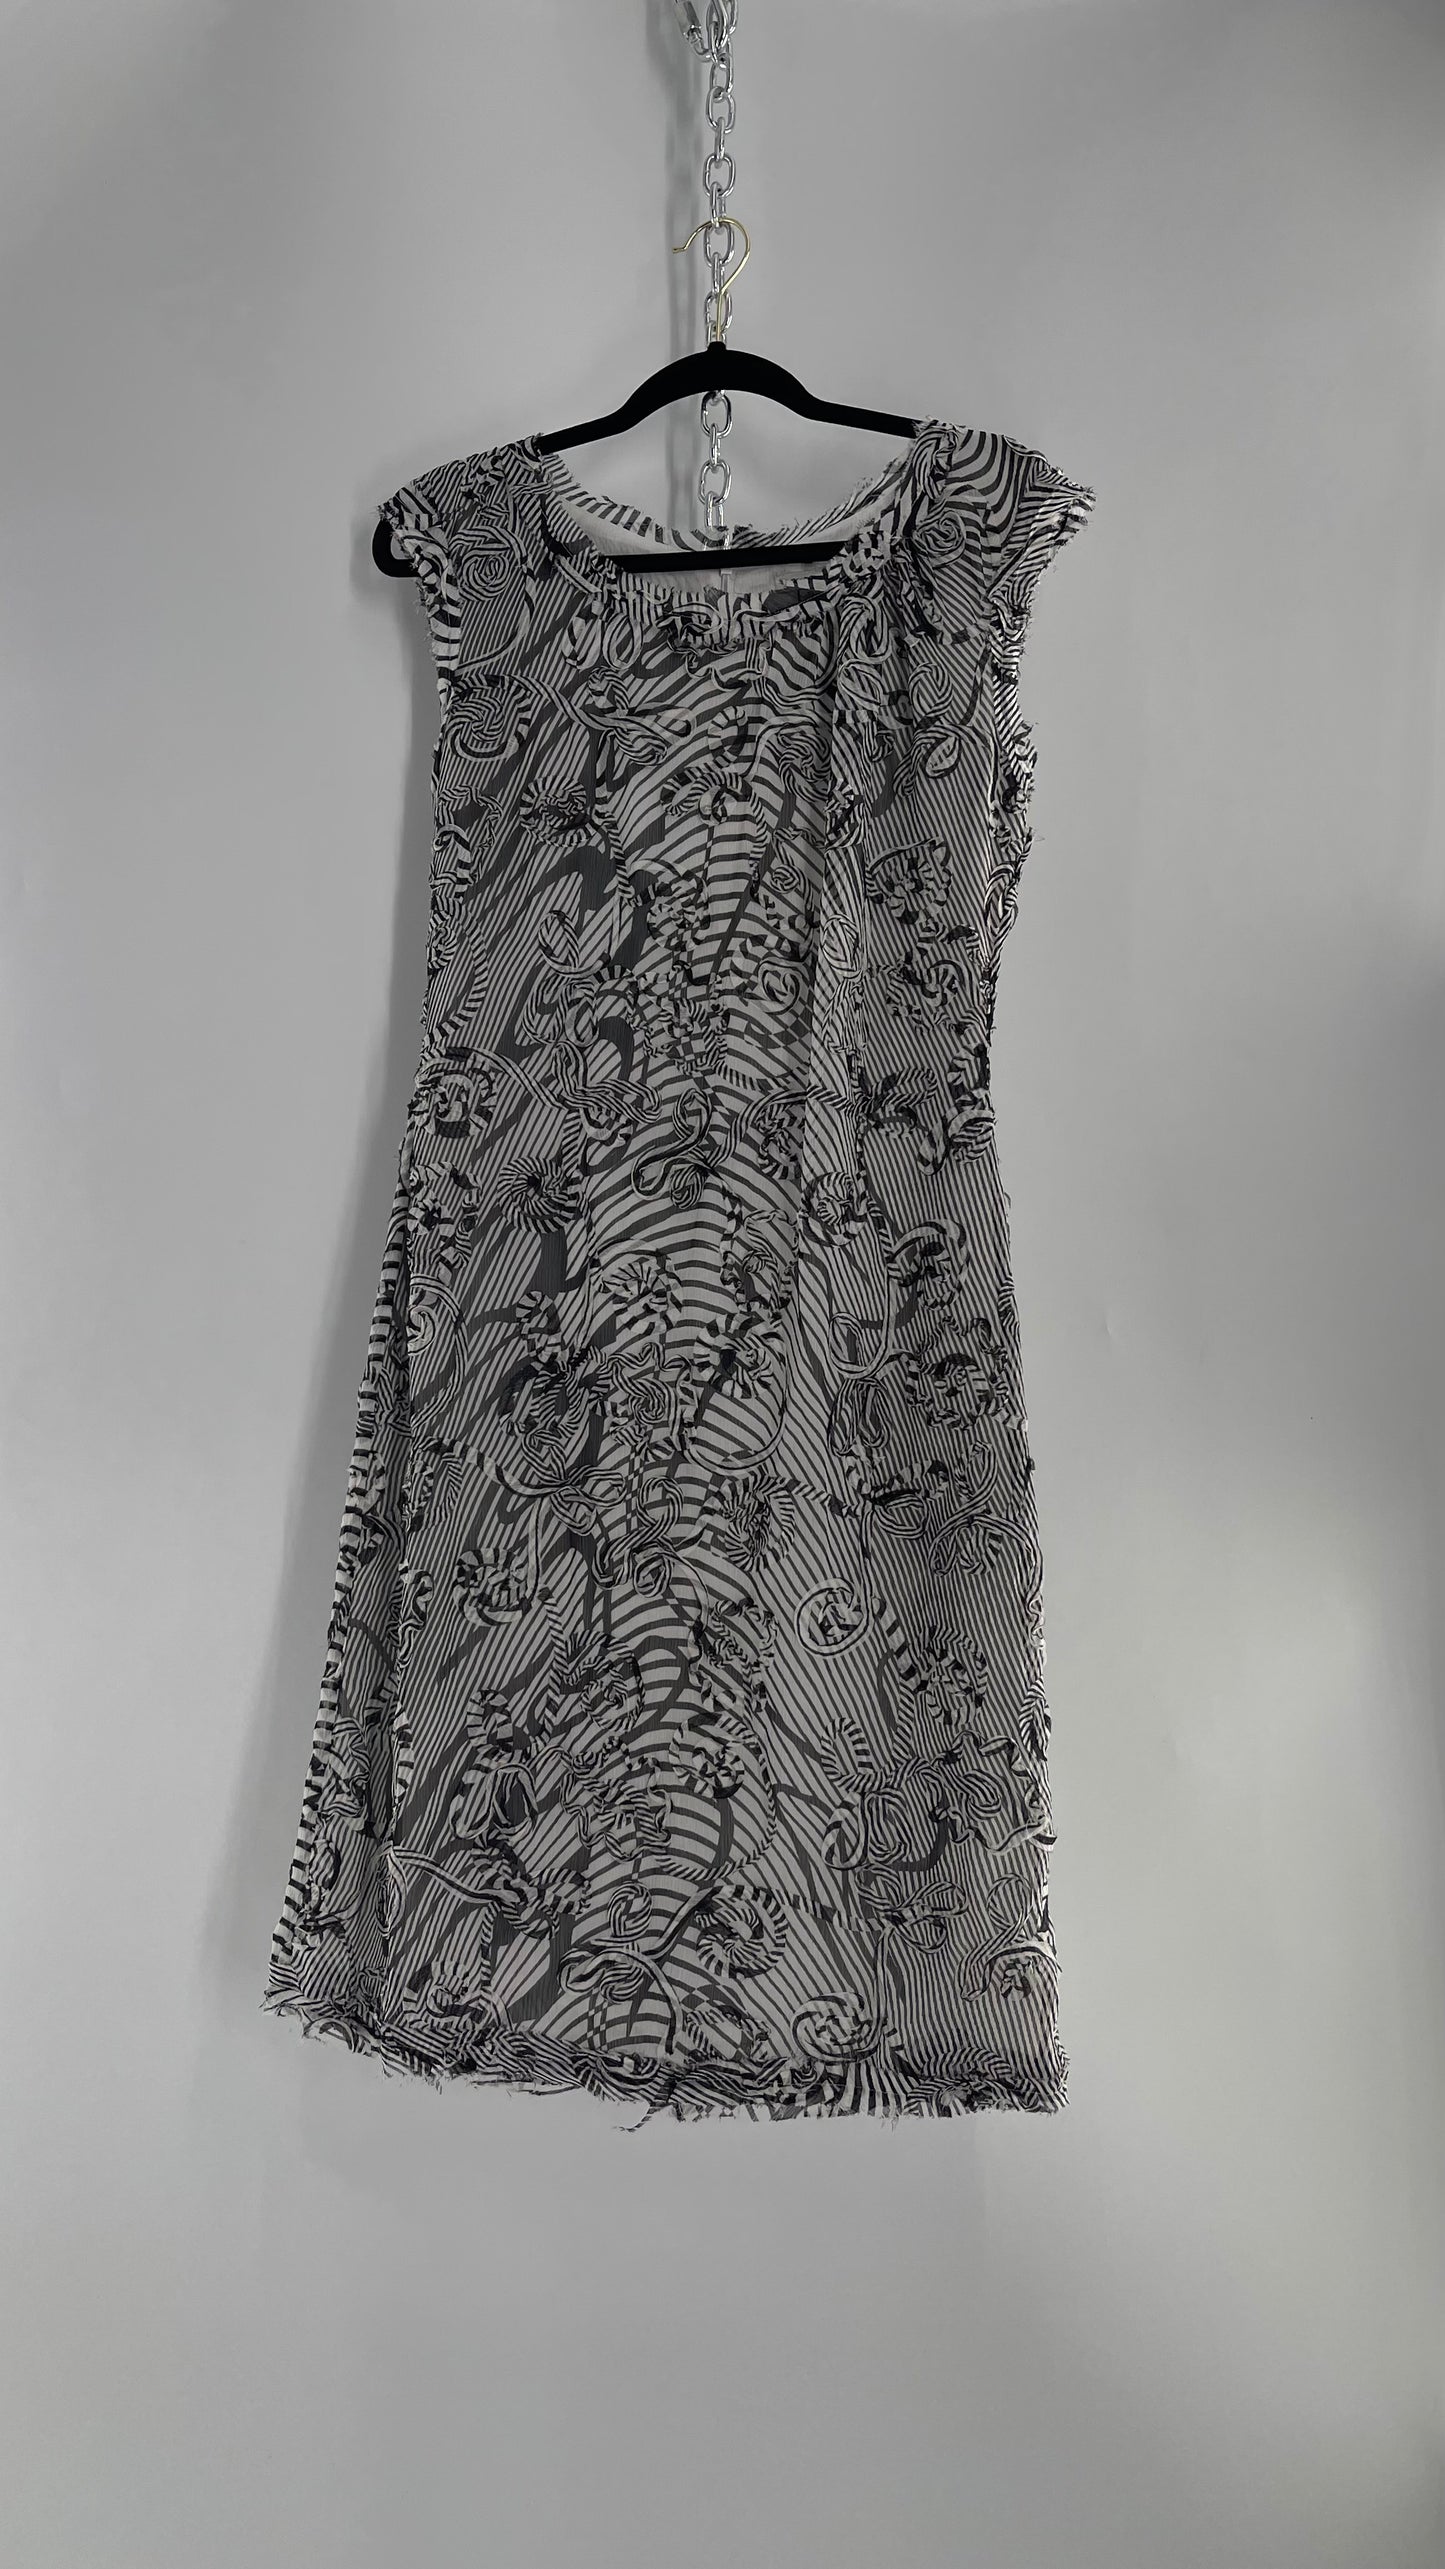 Vintage J. Peterman Black and White Midi Dress with Embroidered Details (10)